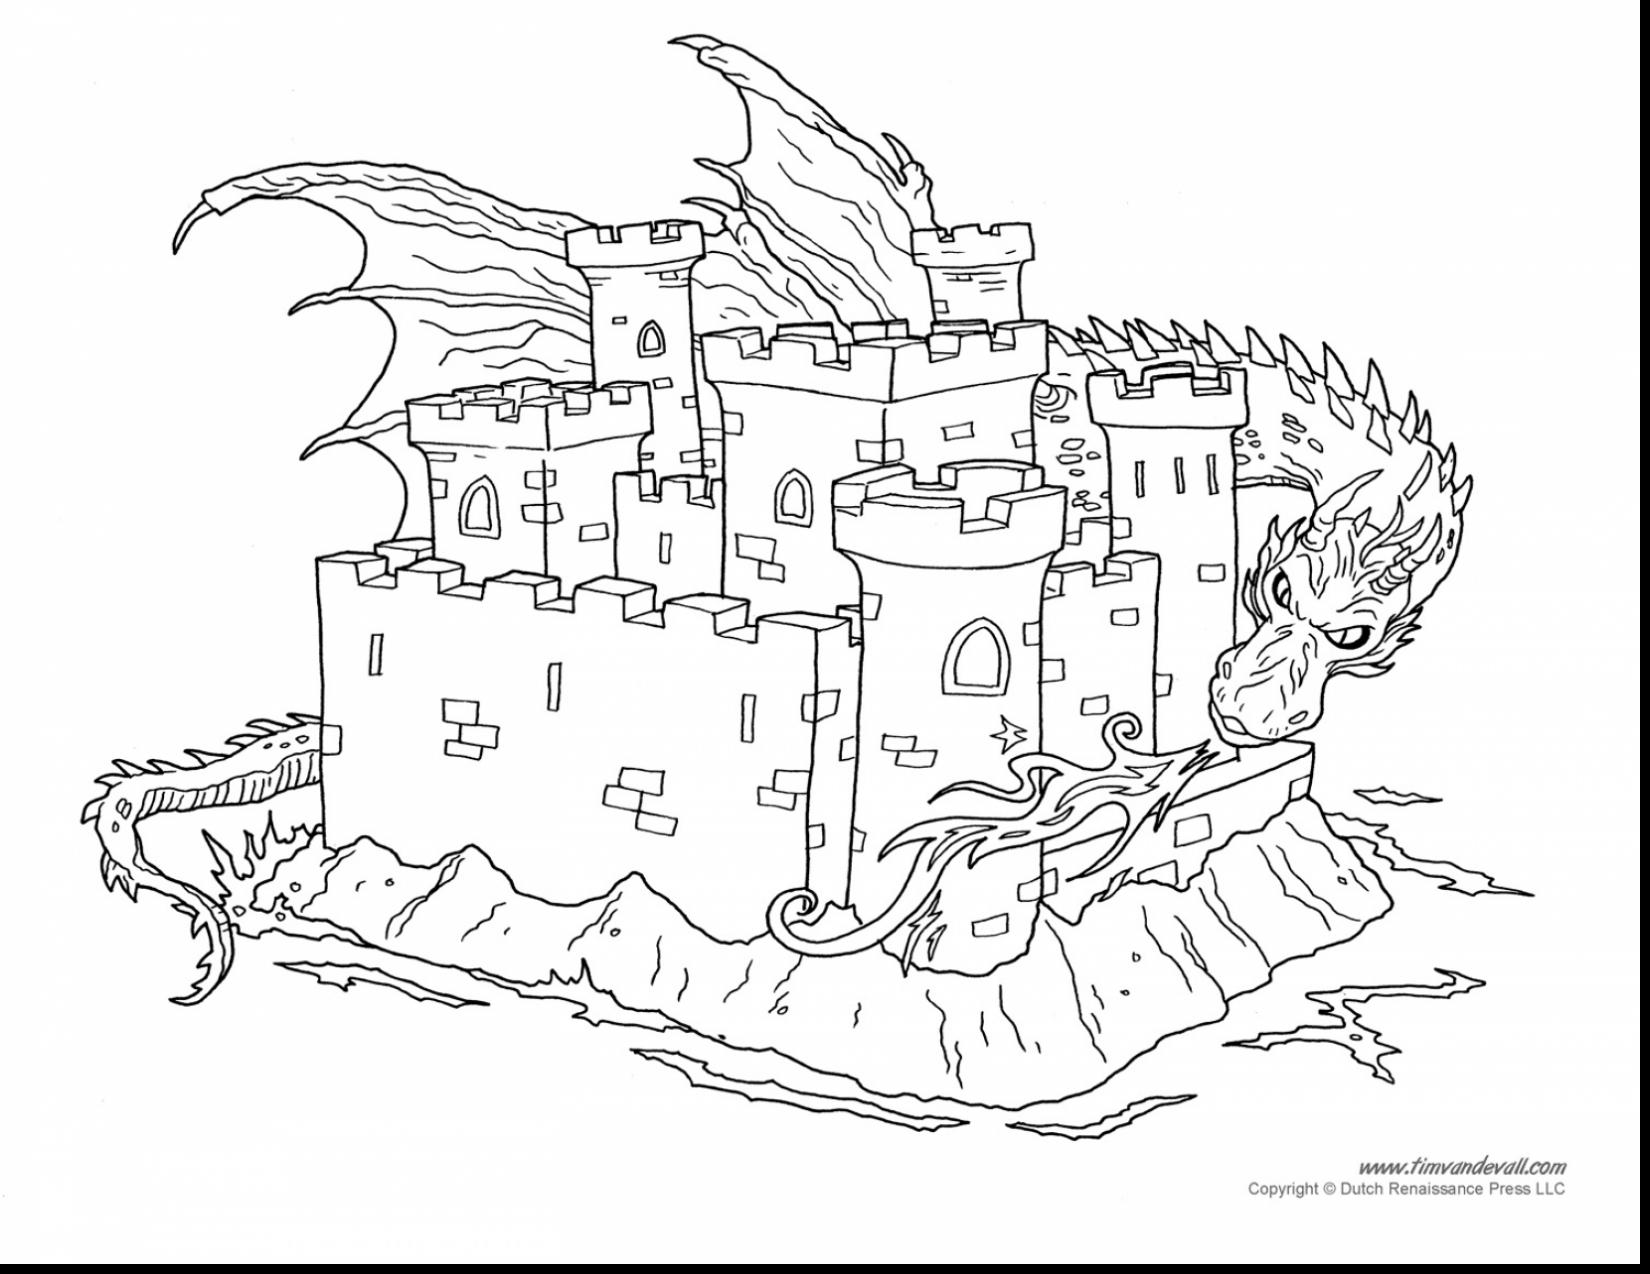 Magnificent Castle coloring #19, Download drawings